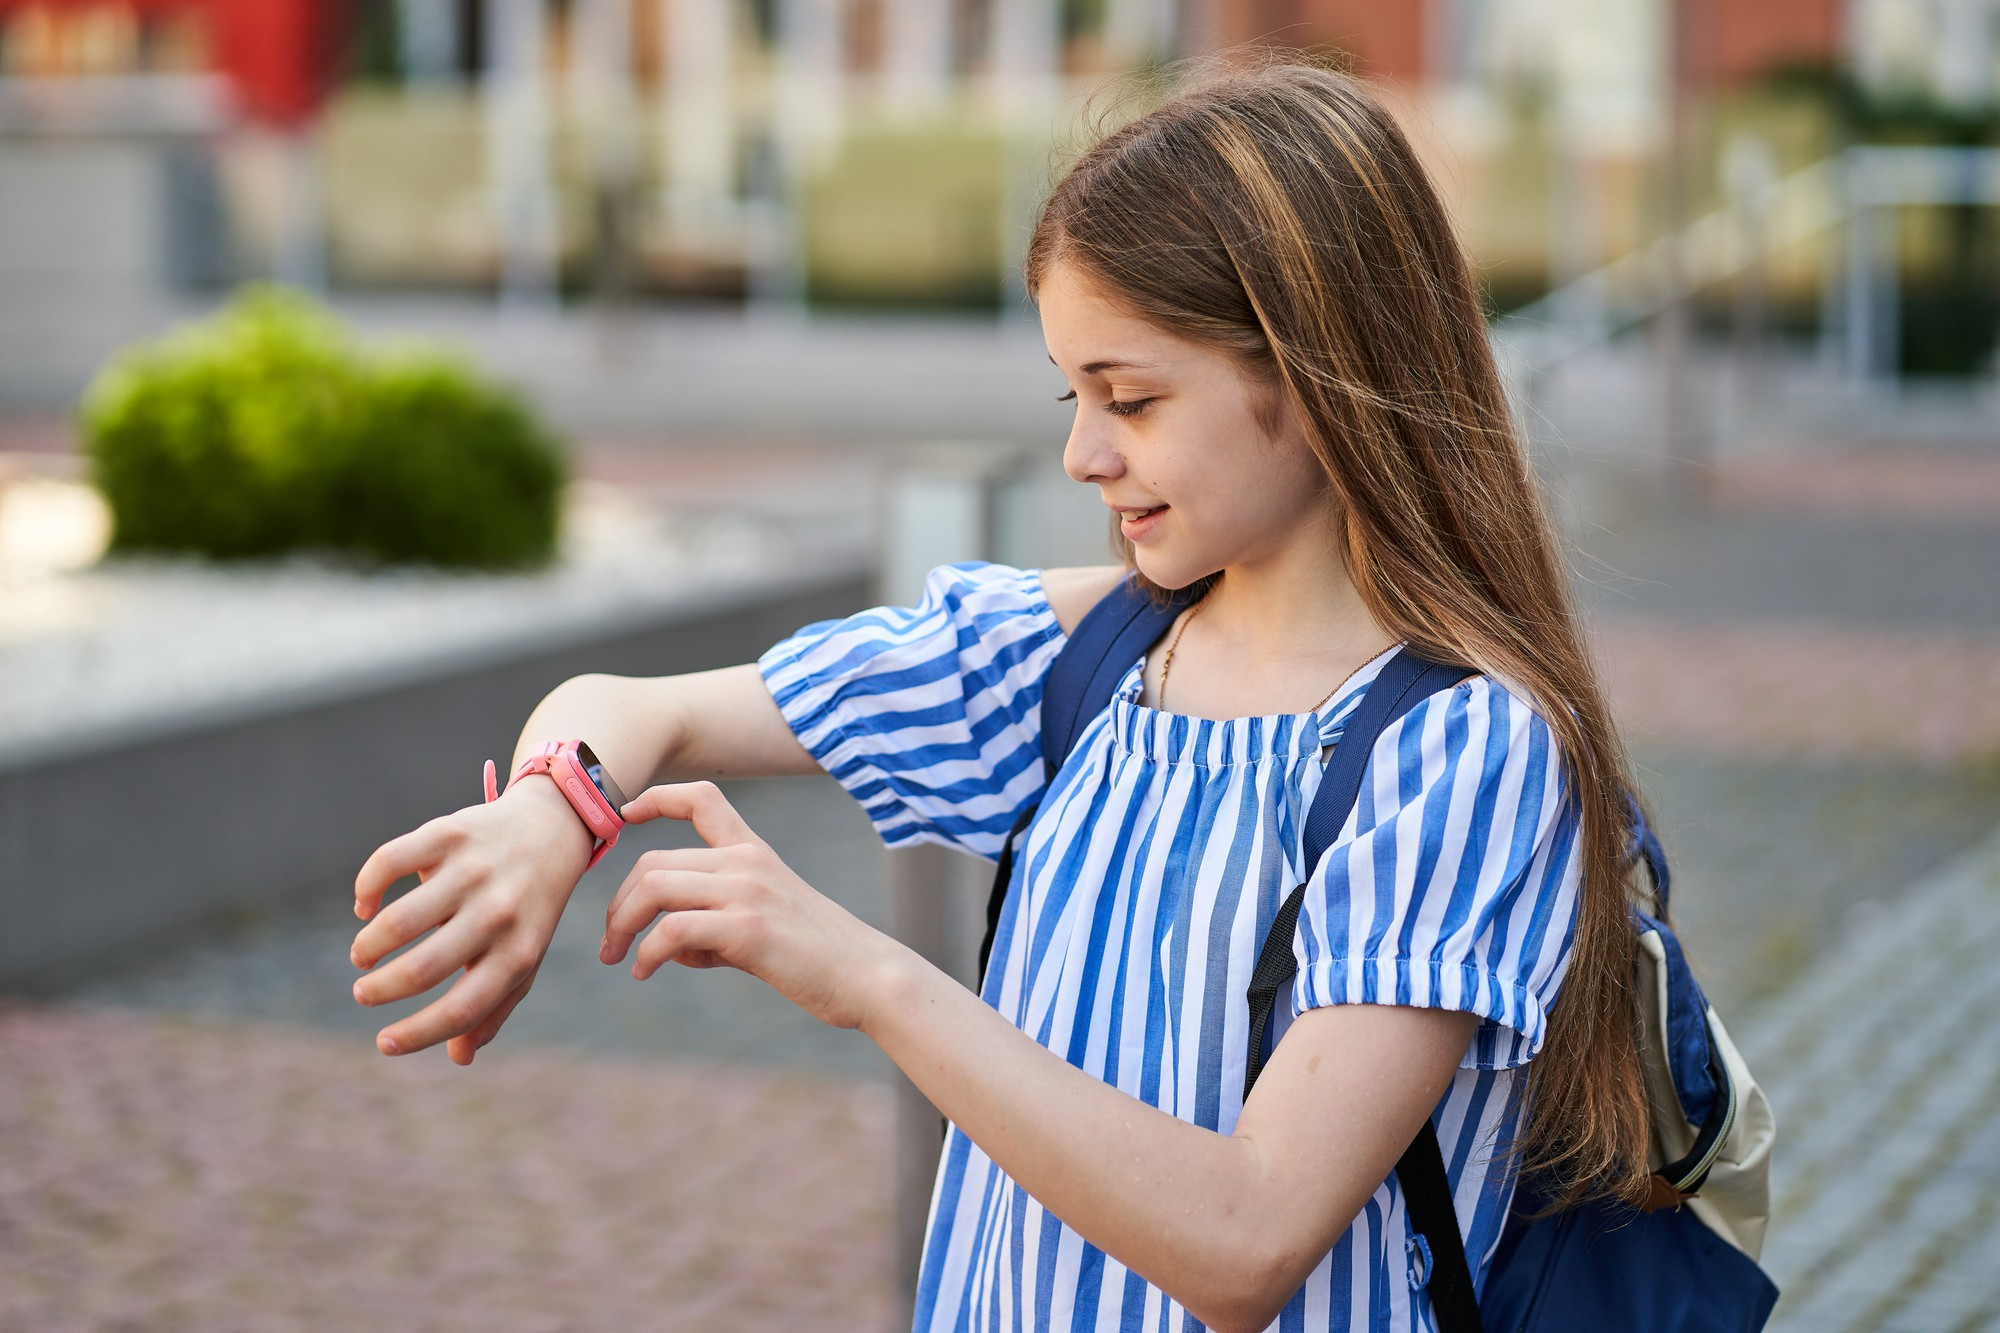 Apple Watch for Kids: A Parent’s Guide